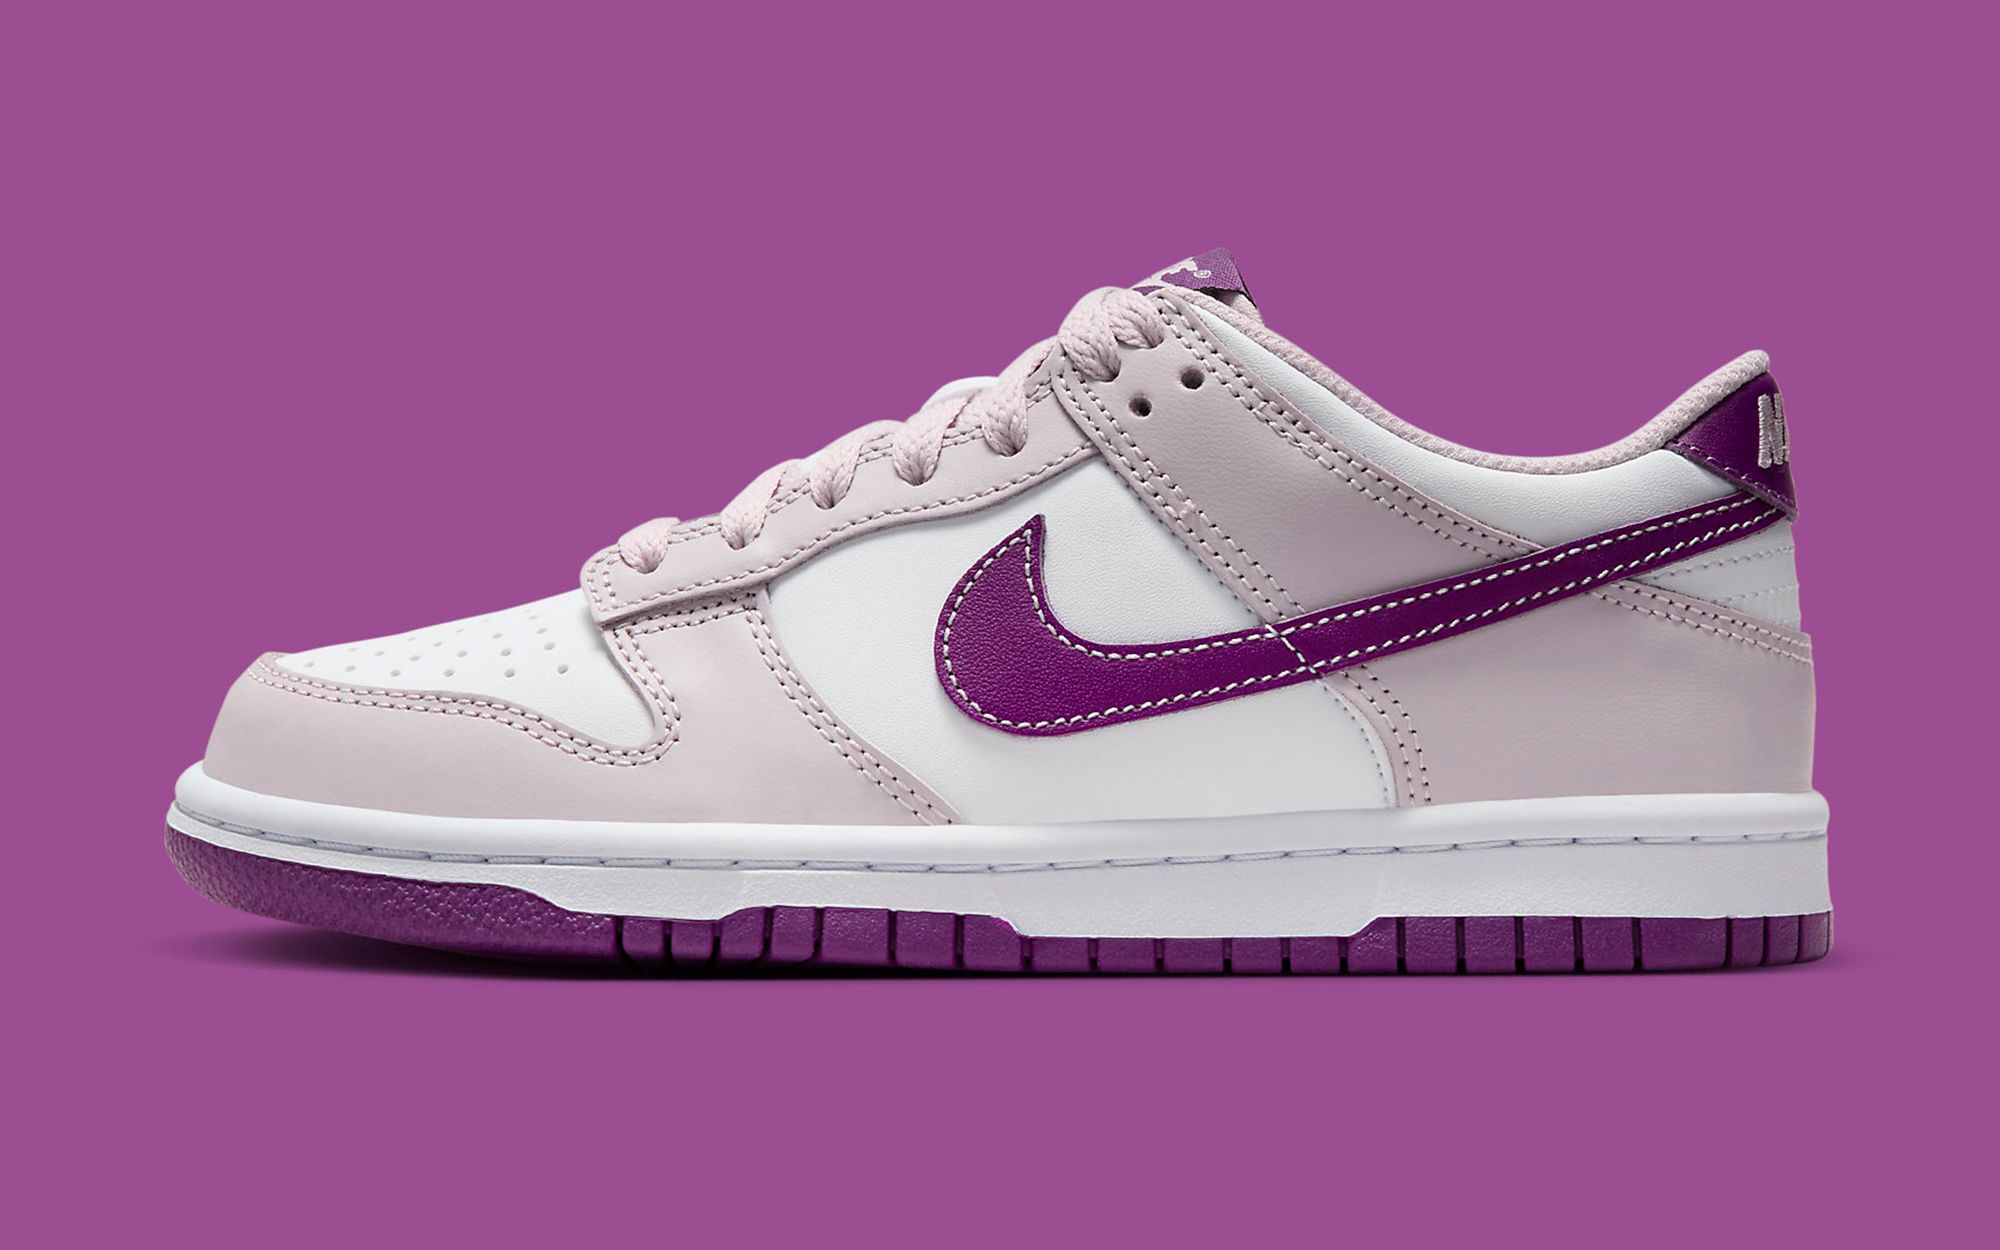 Available Now // Light Mauve and Plum Nike Dunk Low | OdegardcarpetsShops°